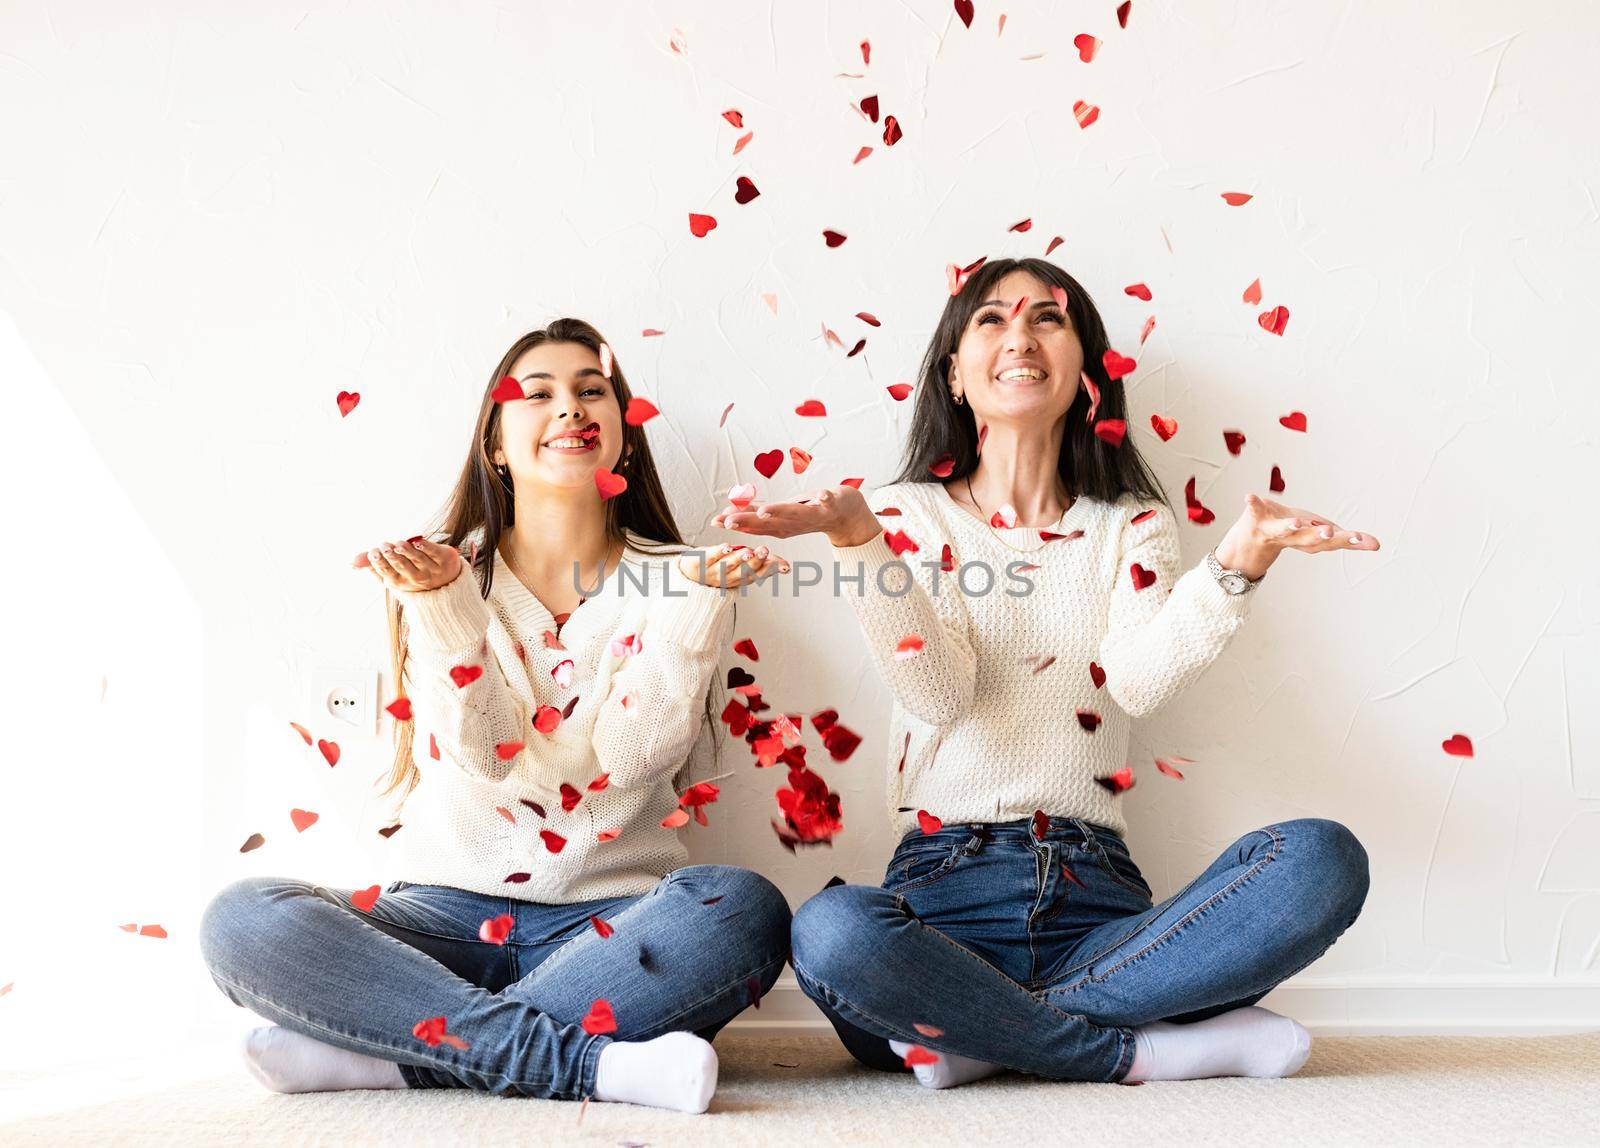 Two best friends having fun at home blowing red heart shape confetti